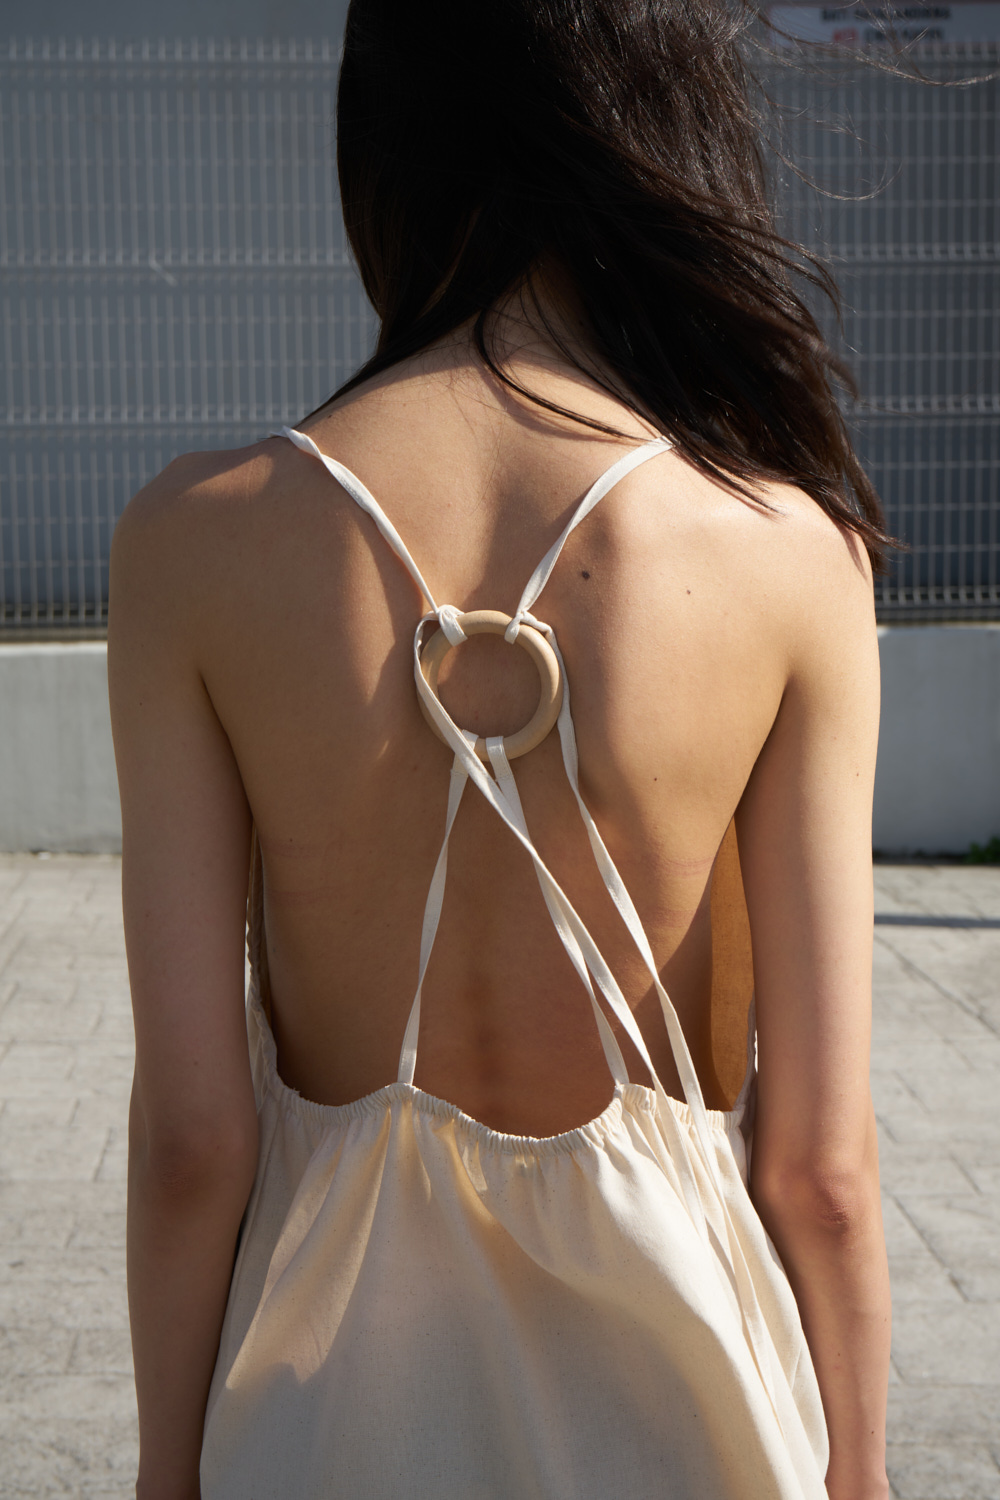 Eba halter dress open back and tie-strings around a small wooden ring. Closeup detailed view.